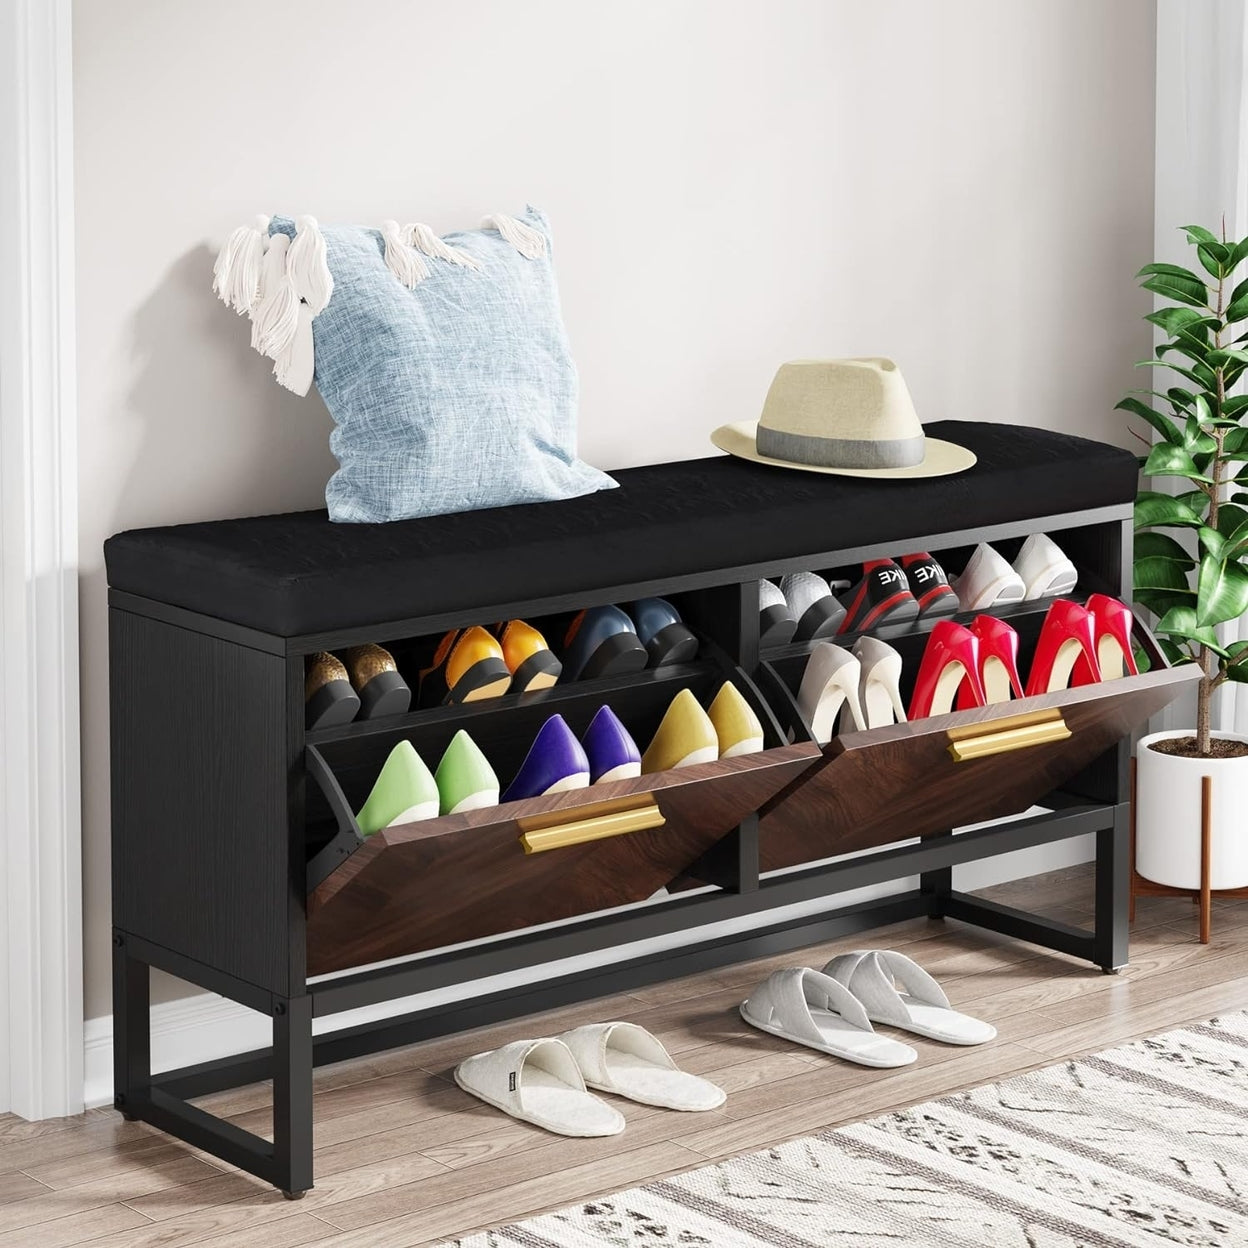 Lavish Home Entryway Storage Bench- Metal Hall Tree with Seat Coat Hooks  and Shoe Storage